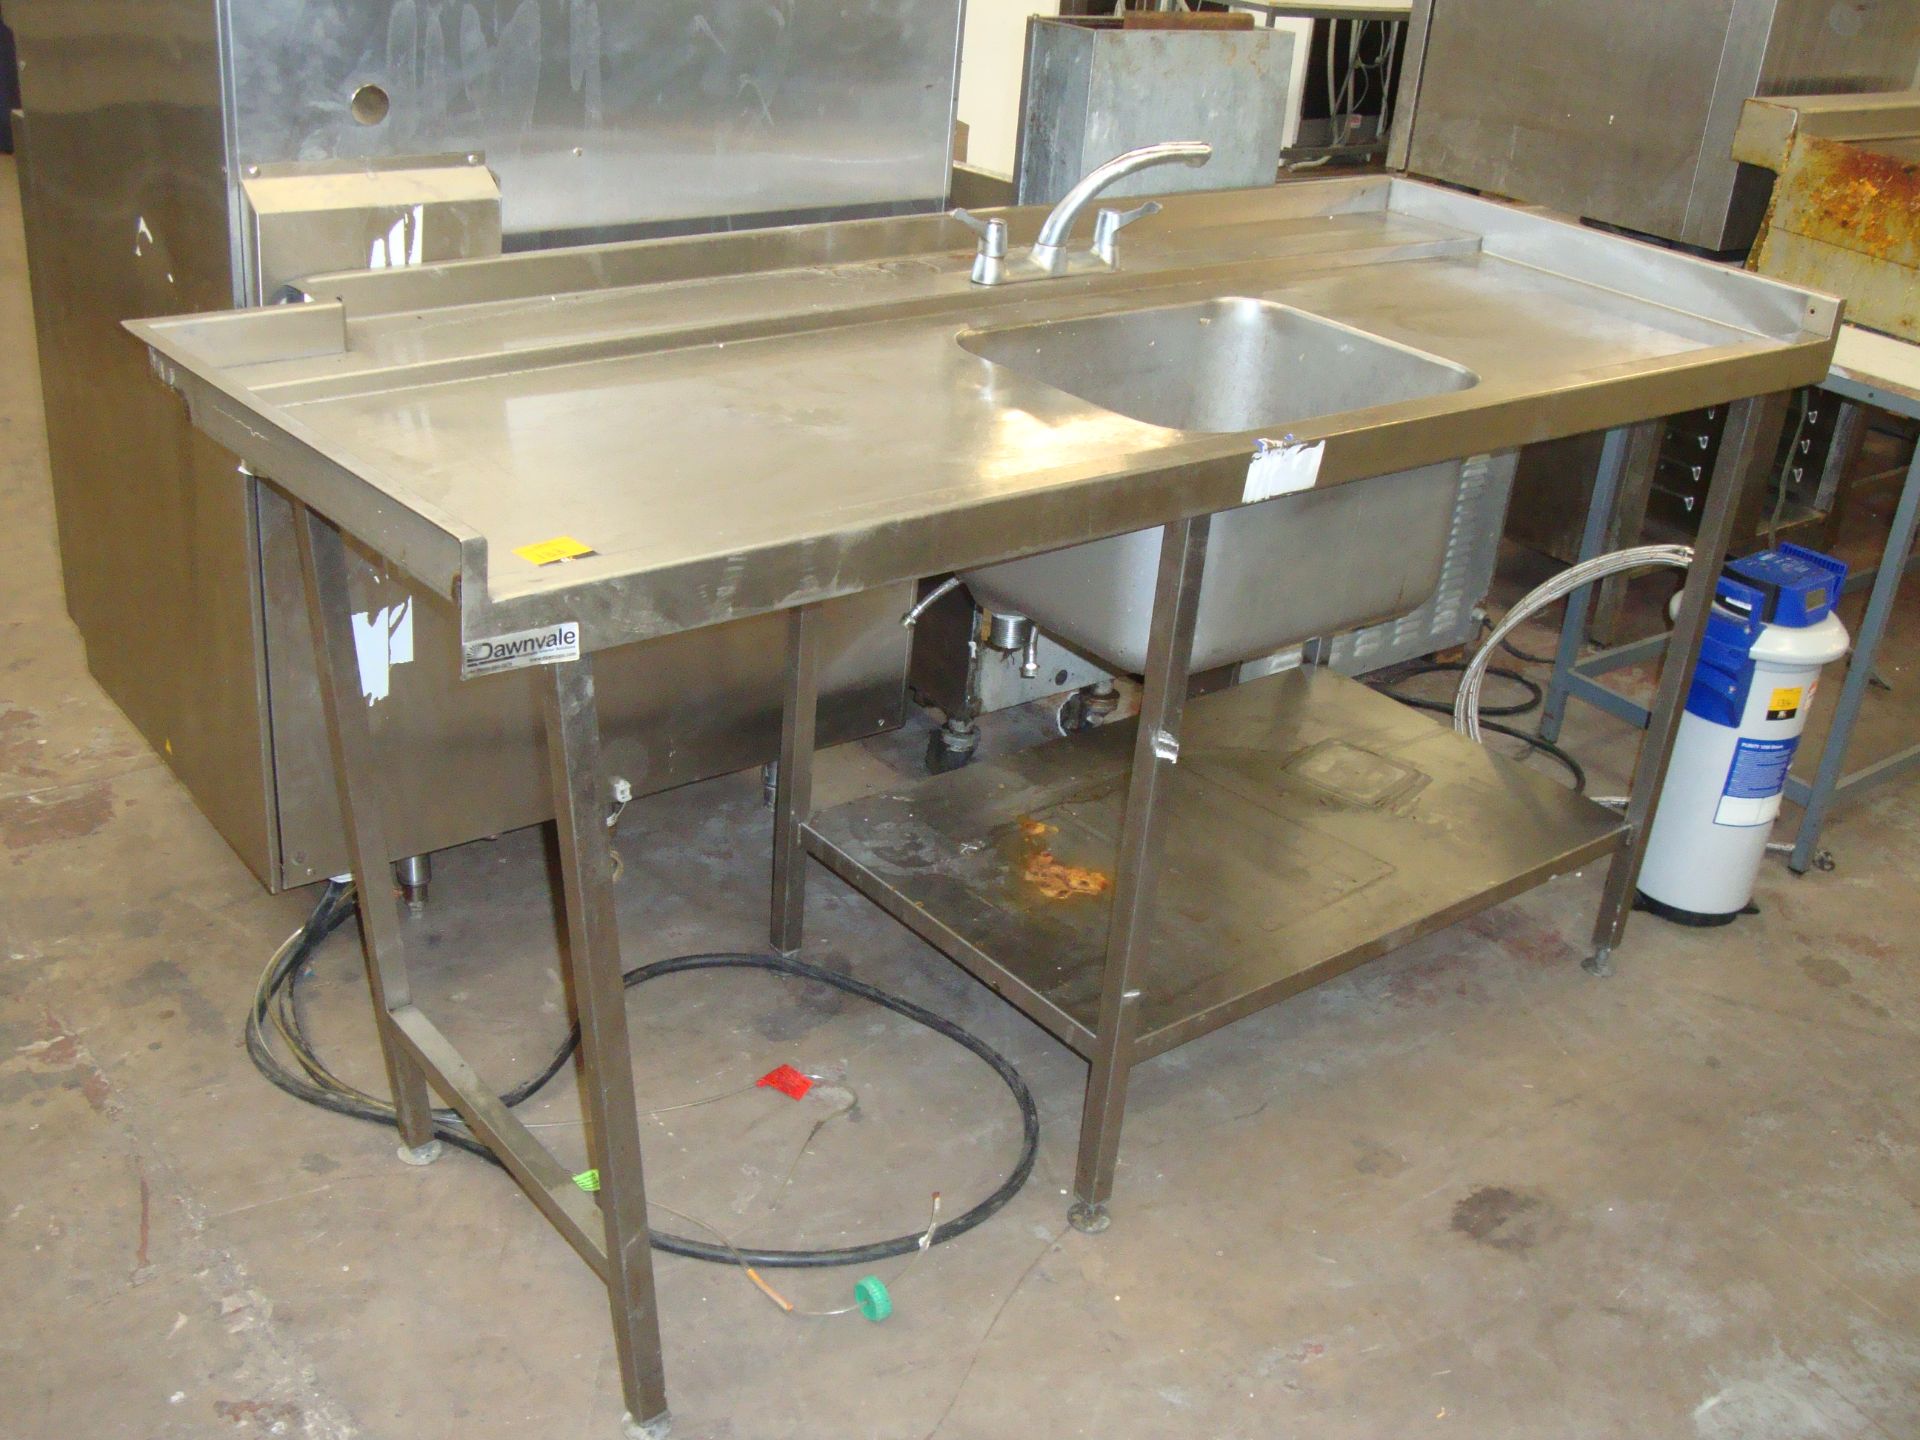 Large stainless steel floorstanding single bowl sink with mixer taps